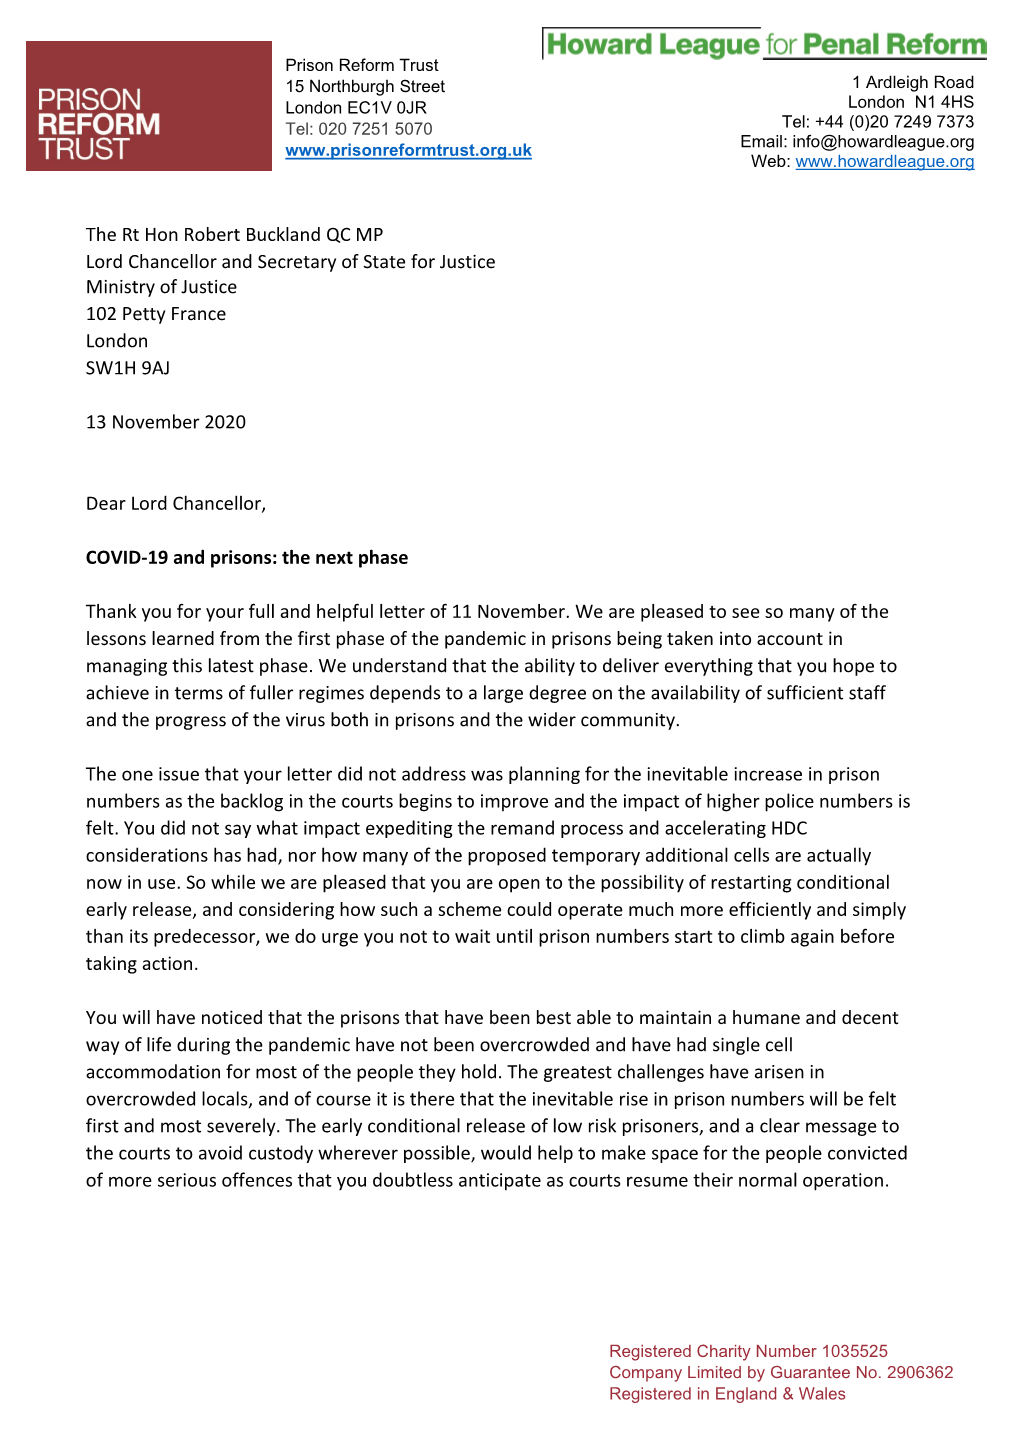 Our Letter to the Secretary of State for Justice, Robert Buckland